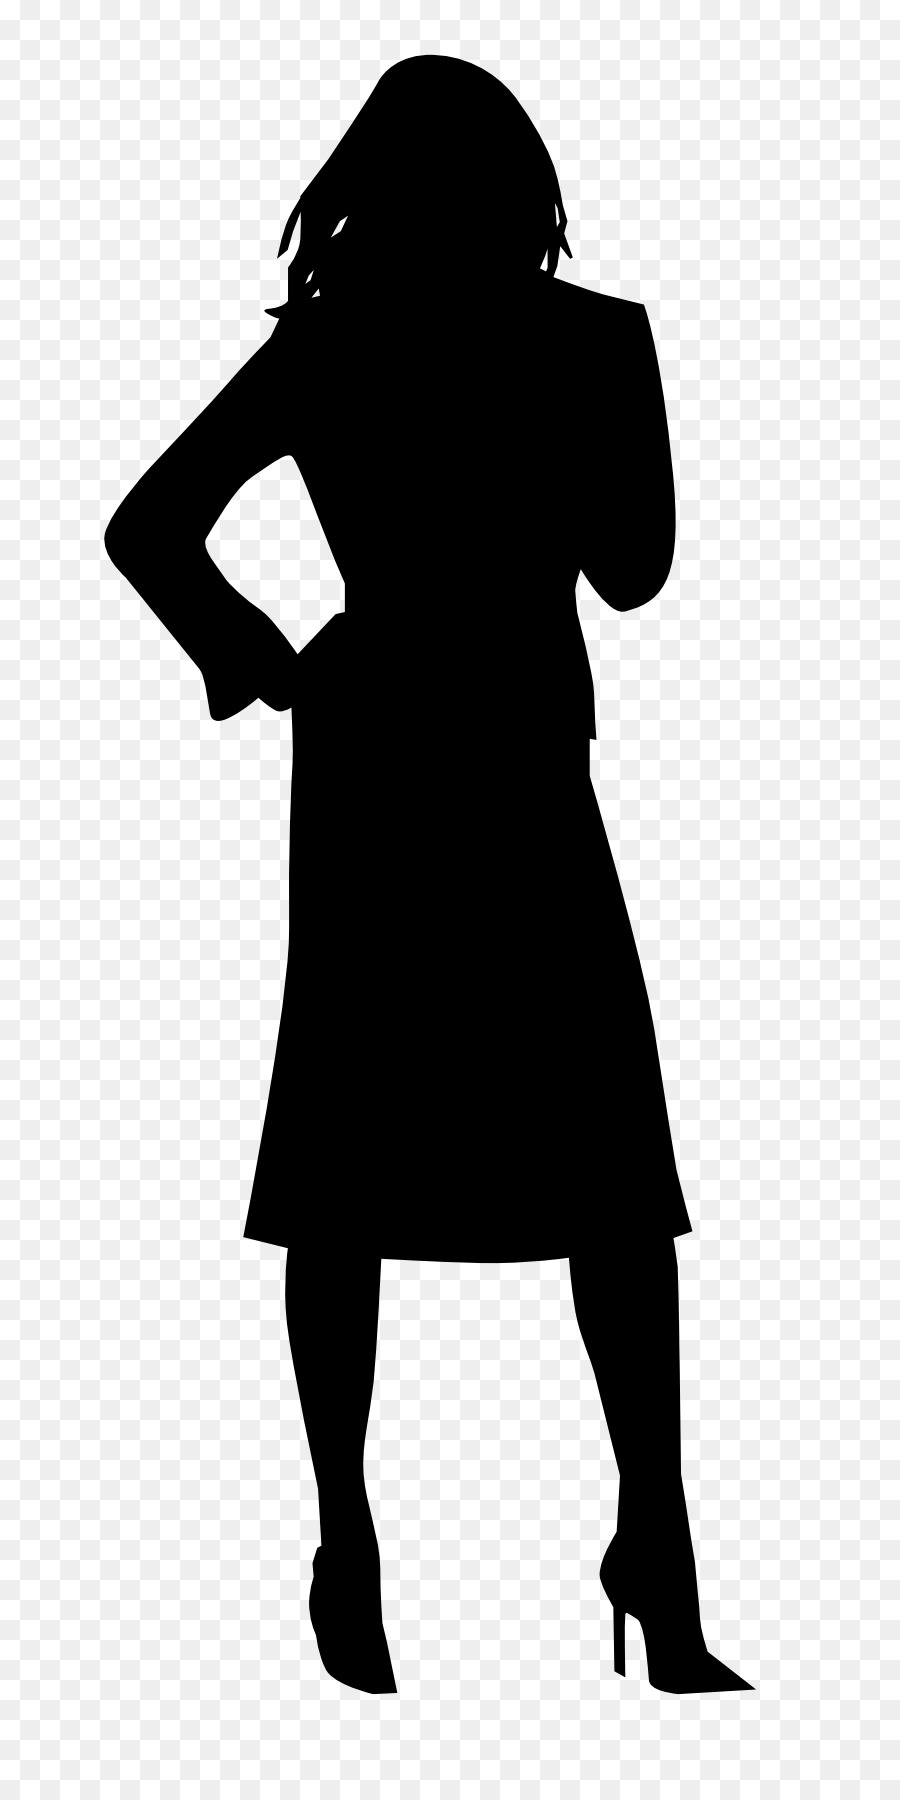 Free African American Woman Face Silhouette, Download Free Clip Art